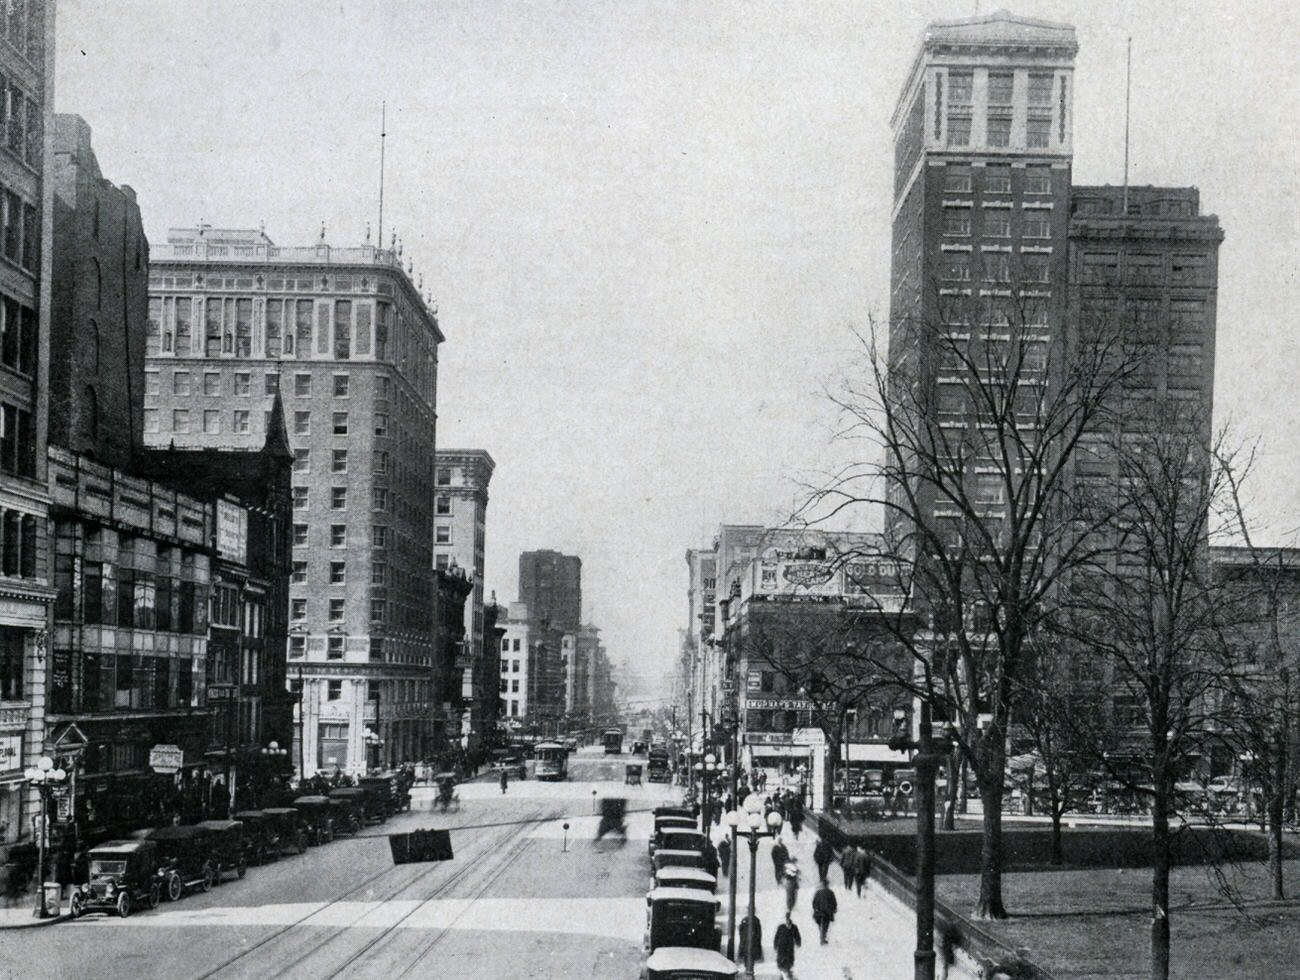 High Street looking north from the Ohio Statehouse, with Deshler Hotel and early Columbus skyscrapers, 1916.